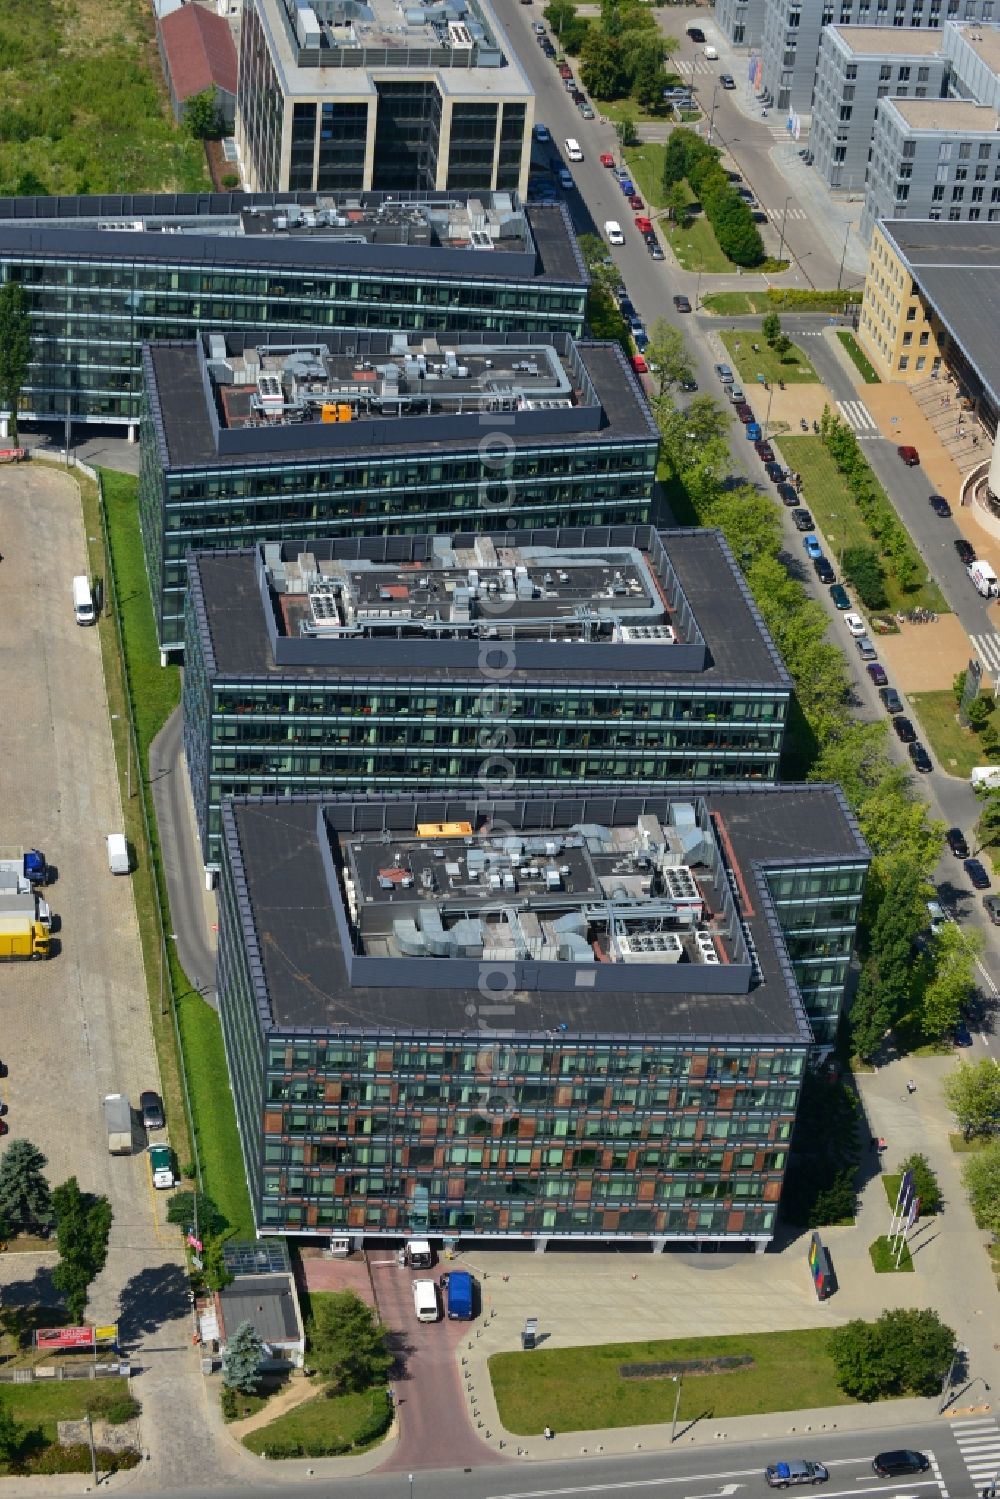 Warschau Mokotow from above - Office and Commercial Building Park Postepu operated by IMMOFINANZ AG in Mokotov district of Warsaw in Poland